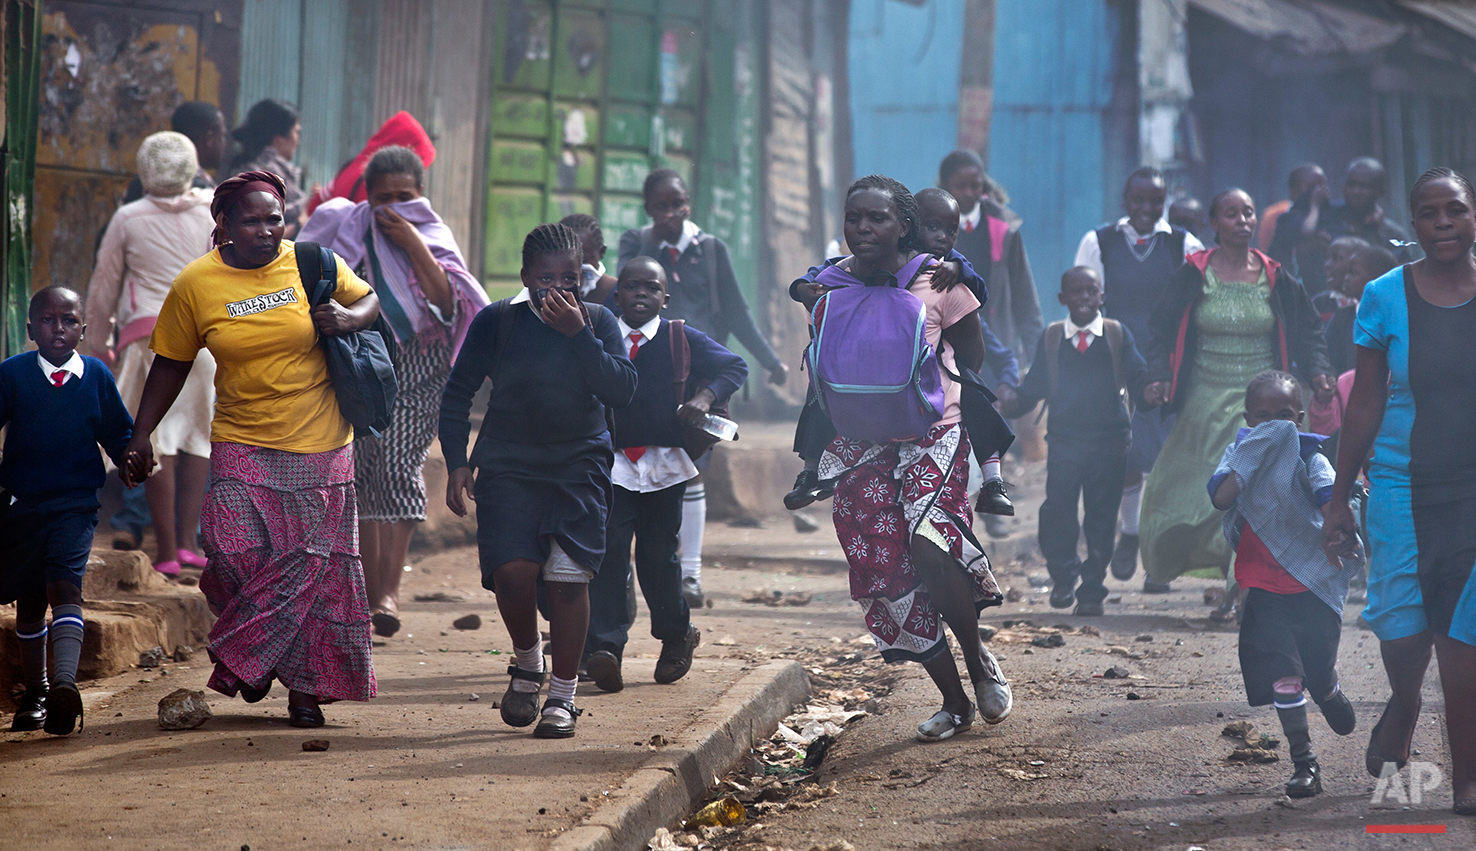  Women and schoolchildren take advantage of a lull in the clashes to run to safety, as police firing tear gas engage protesters throwing rocks in the Kibera slum of Nairobi, Kenya Monday, May 23, 2016. Kenya's police shot, beat and tear gassed opposi